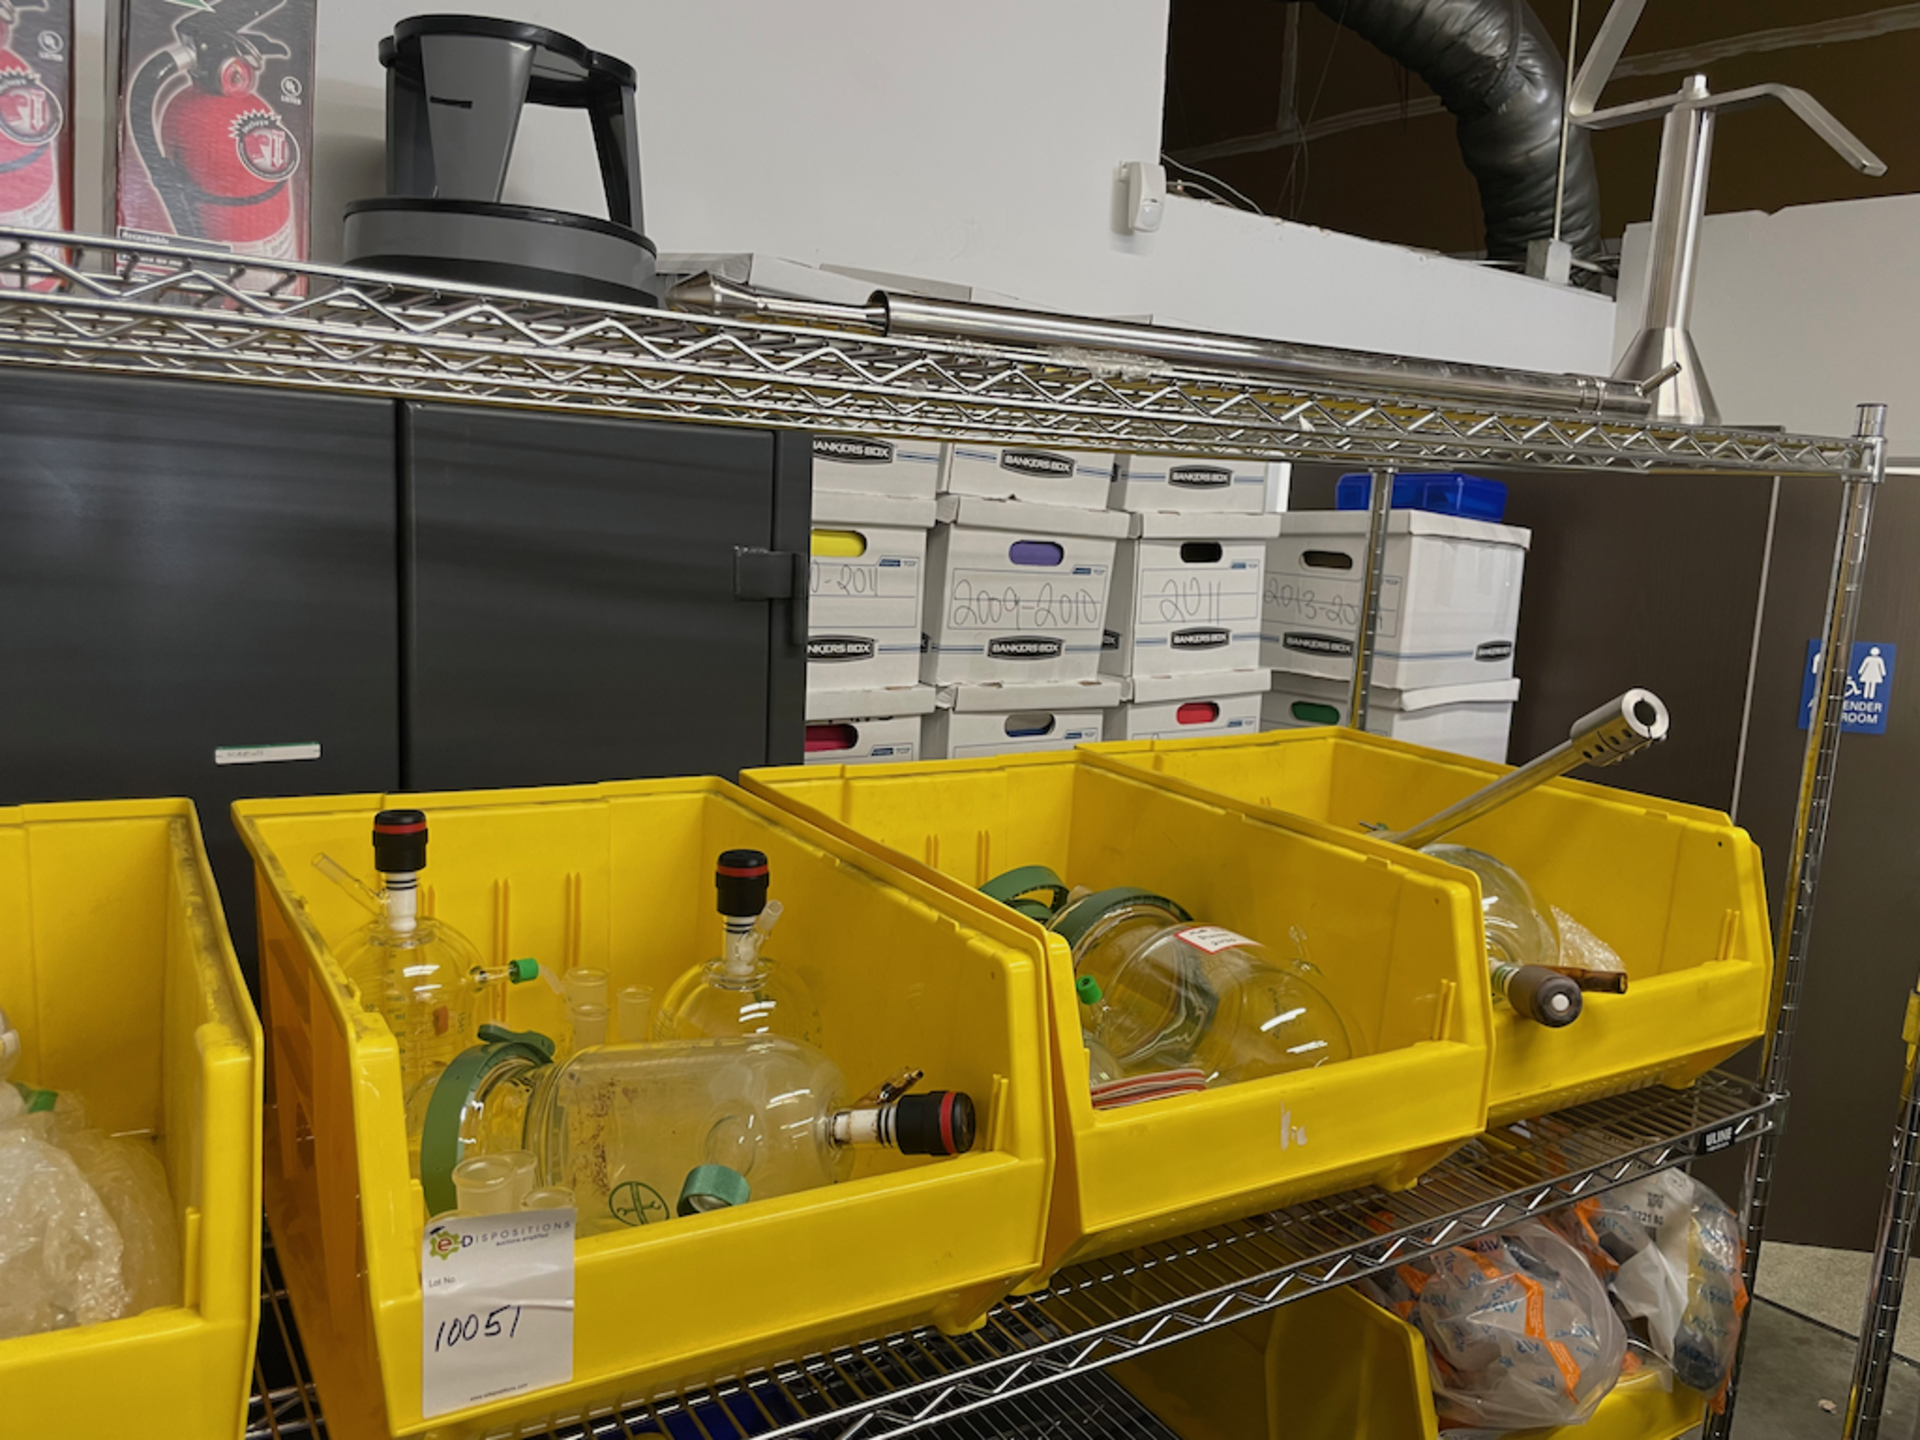 CHEMGLASS LOT CONSISTING OF THE CONTENTS OF QTY-4 YELLOW TOTE BINS CONTAINING VARIOUS CHEMGLASS